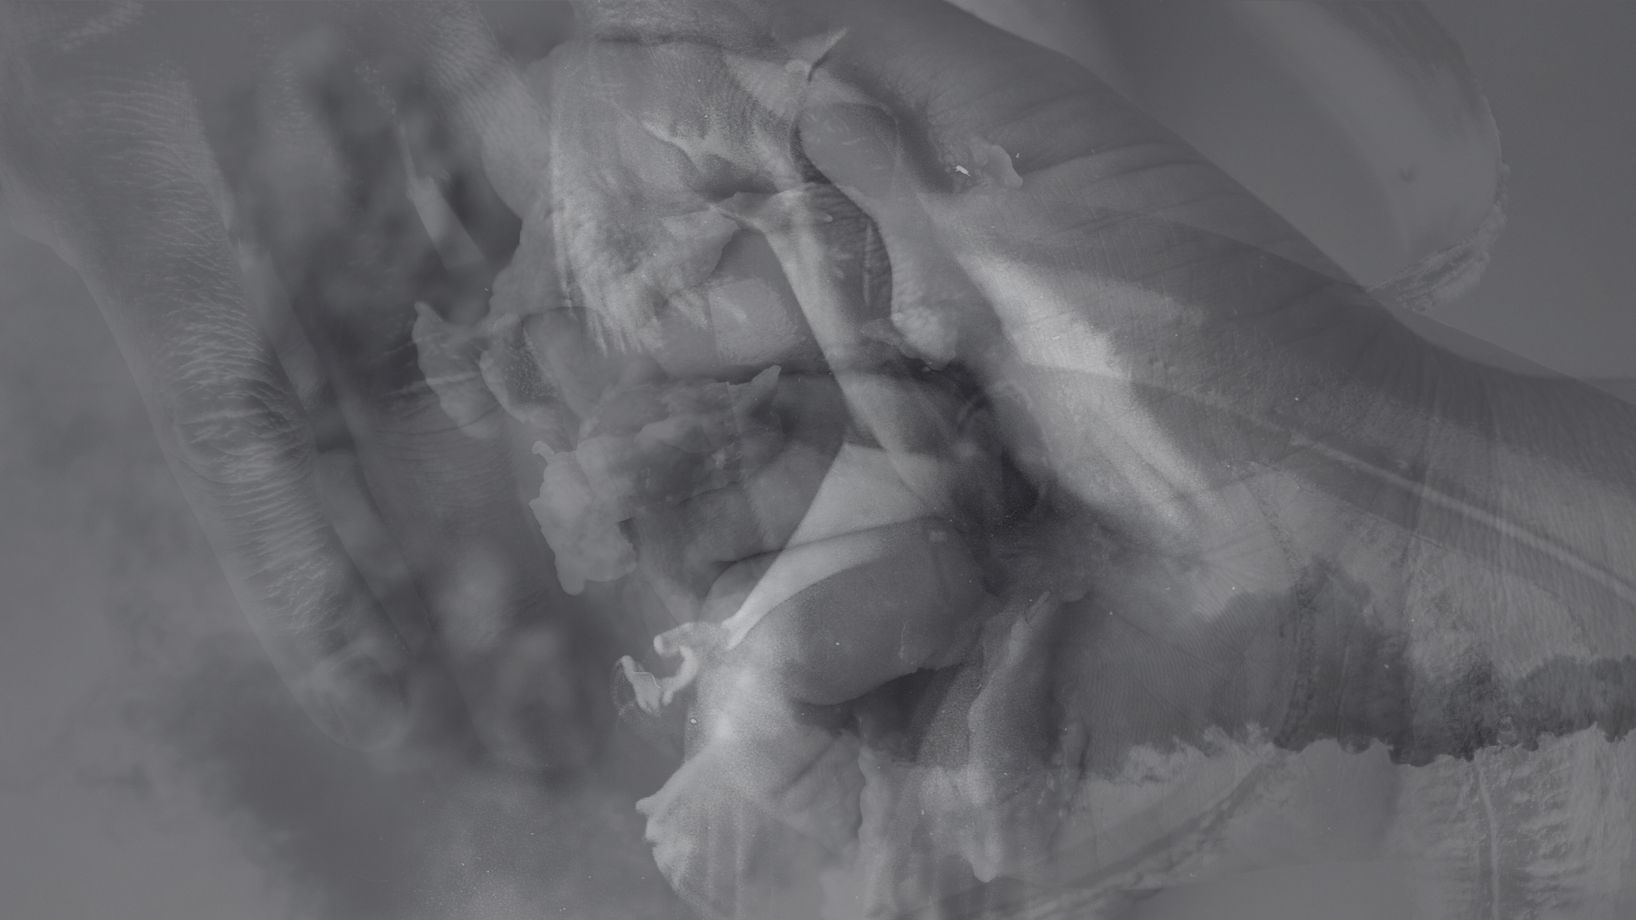 translucent b&w pictures of human body parts layered on top of each others